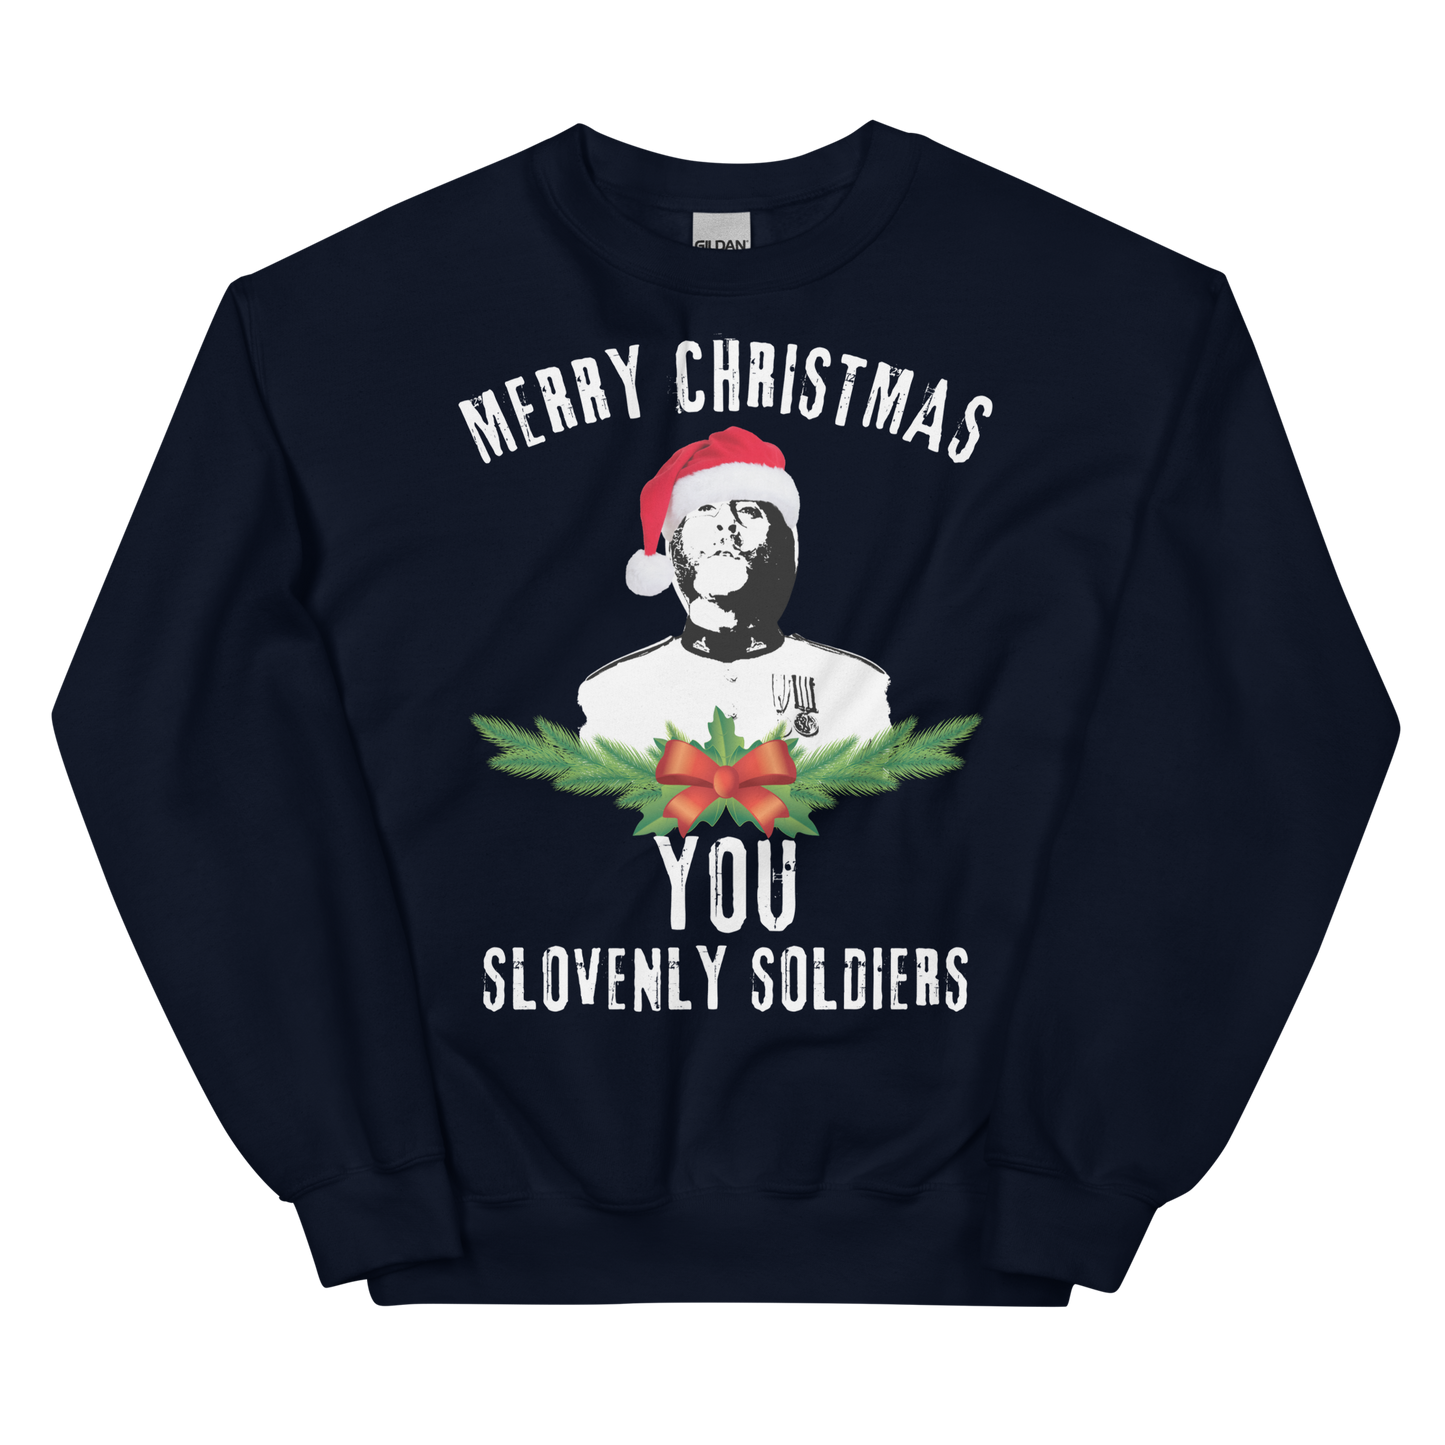 Merry Christmas You Slovenly Soldiers (Festive Jumper)